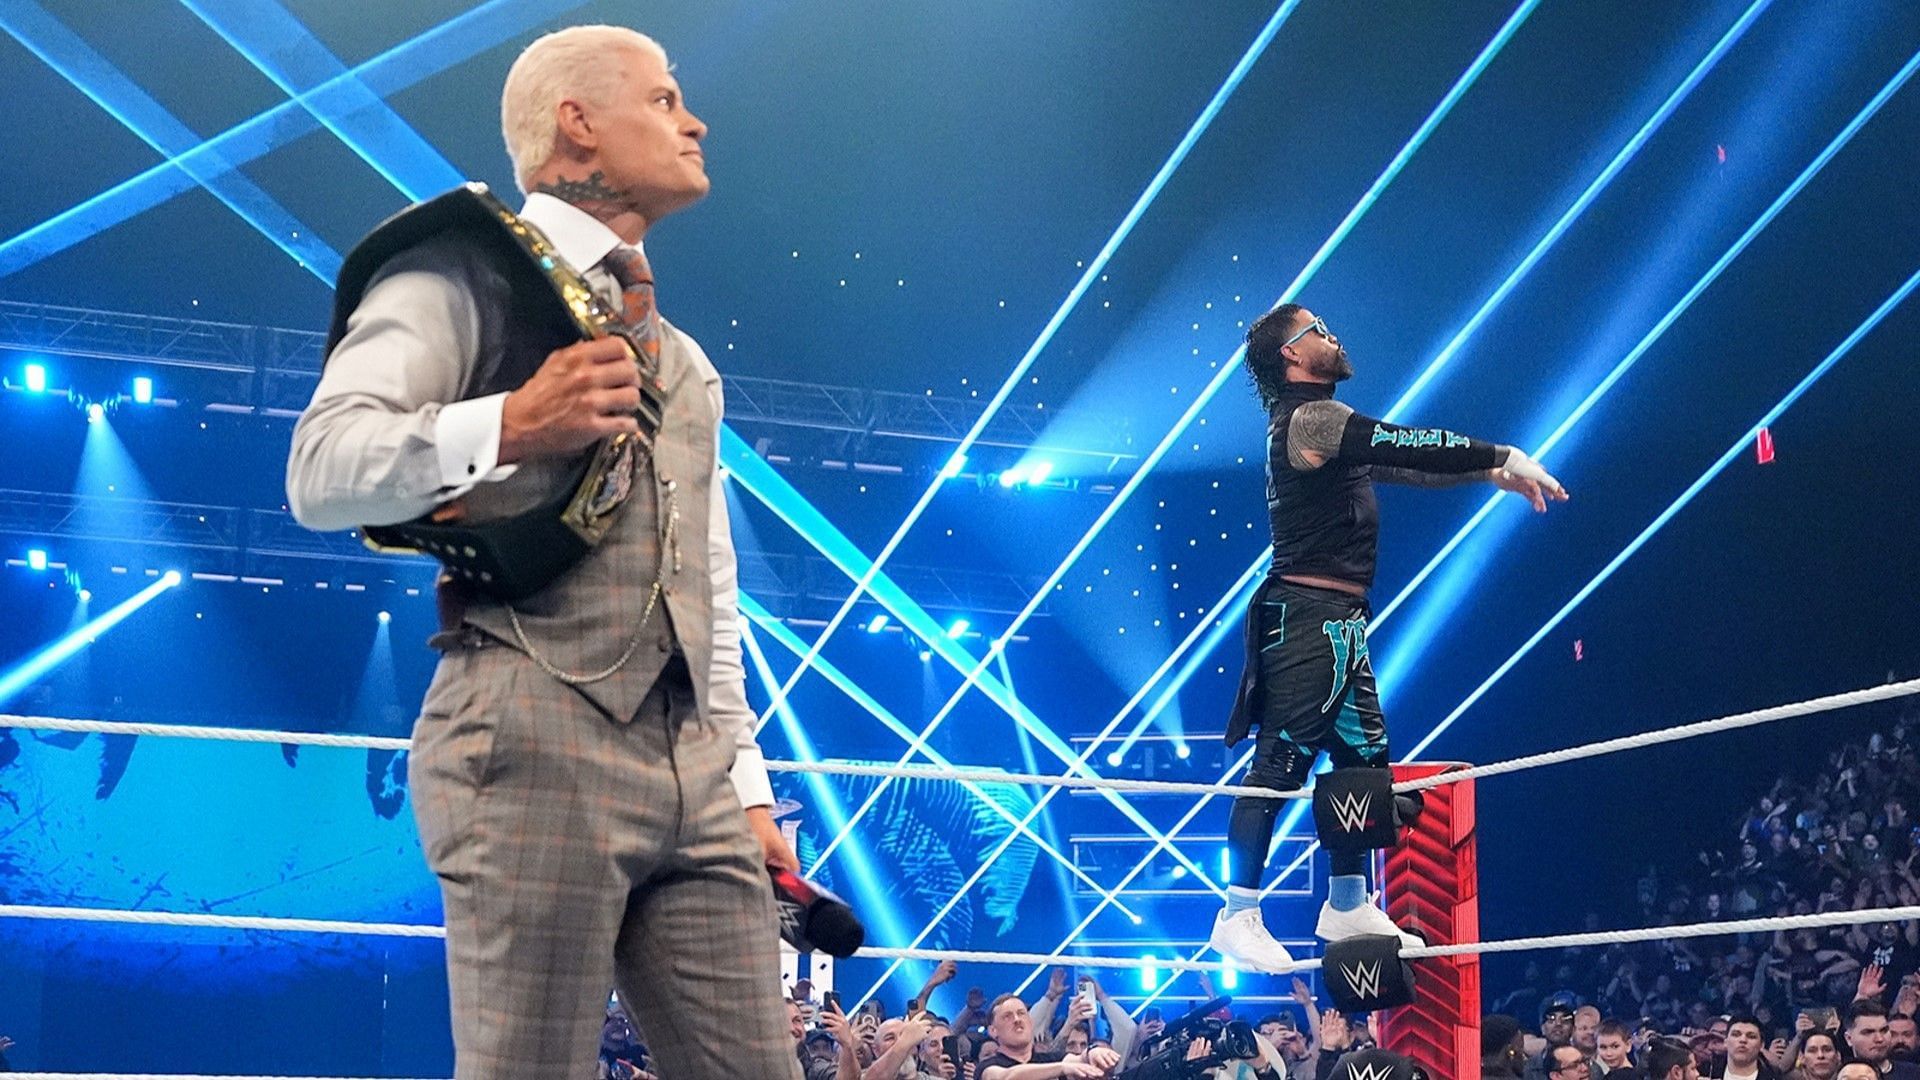 Cody Rhodes and Jey Uso in the ring on WWE RAW